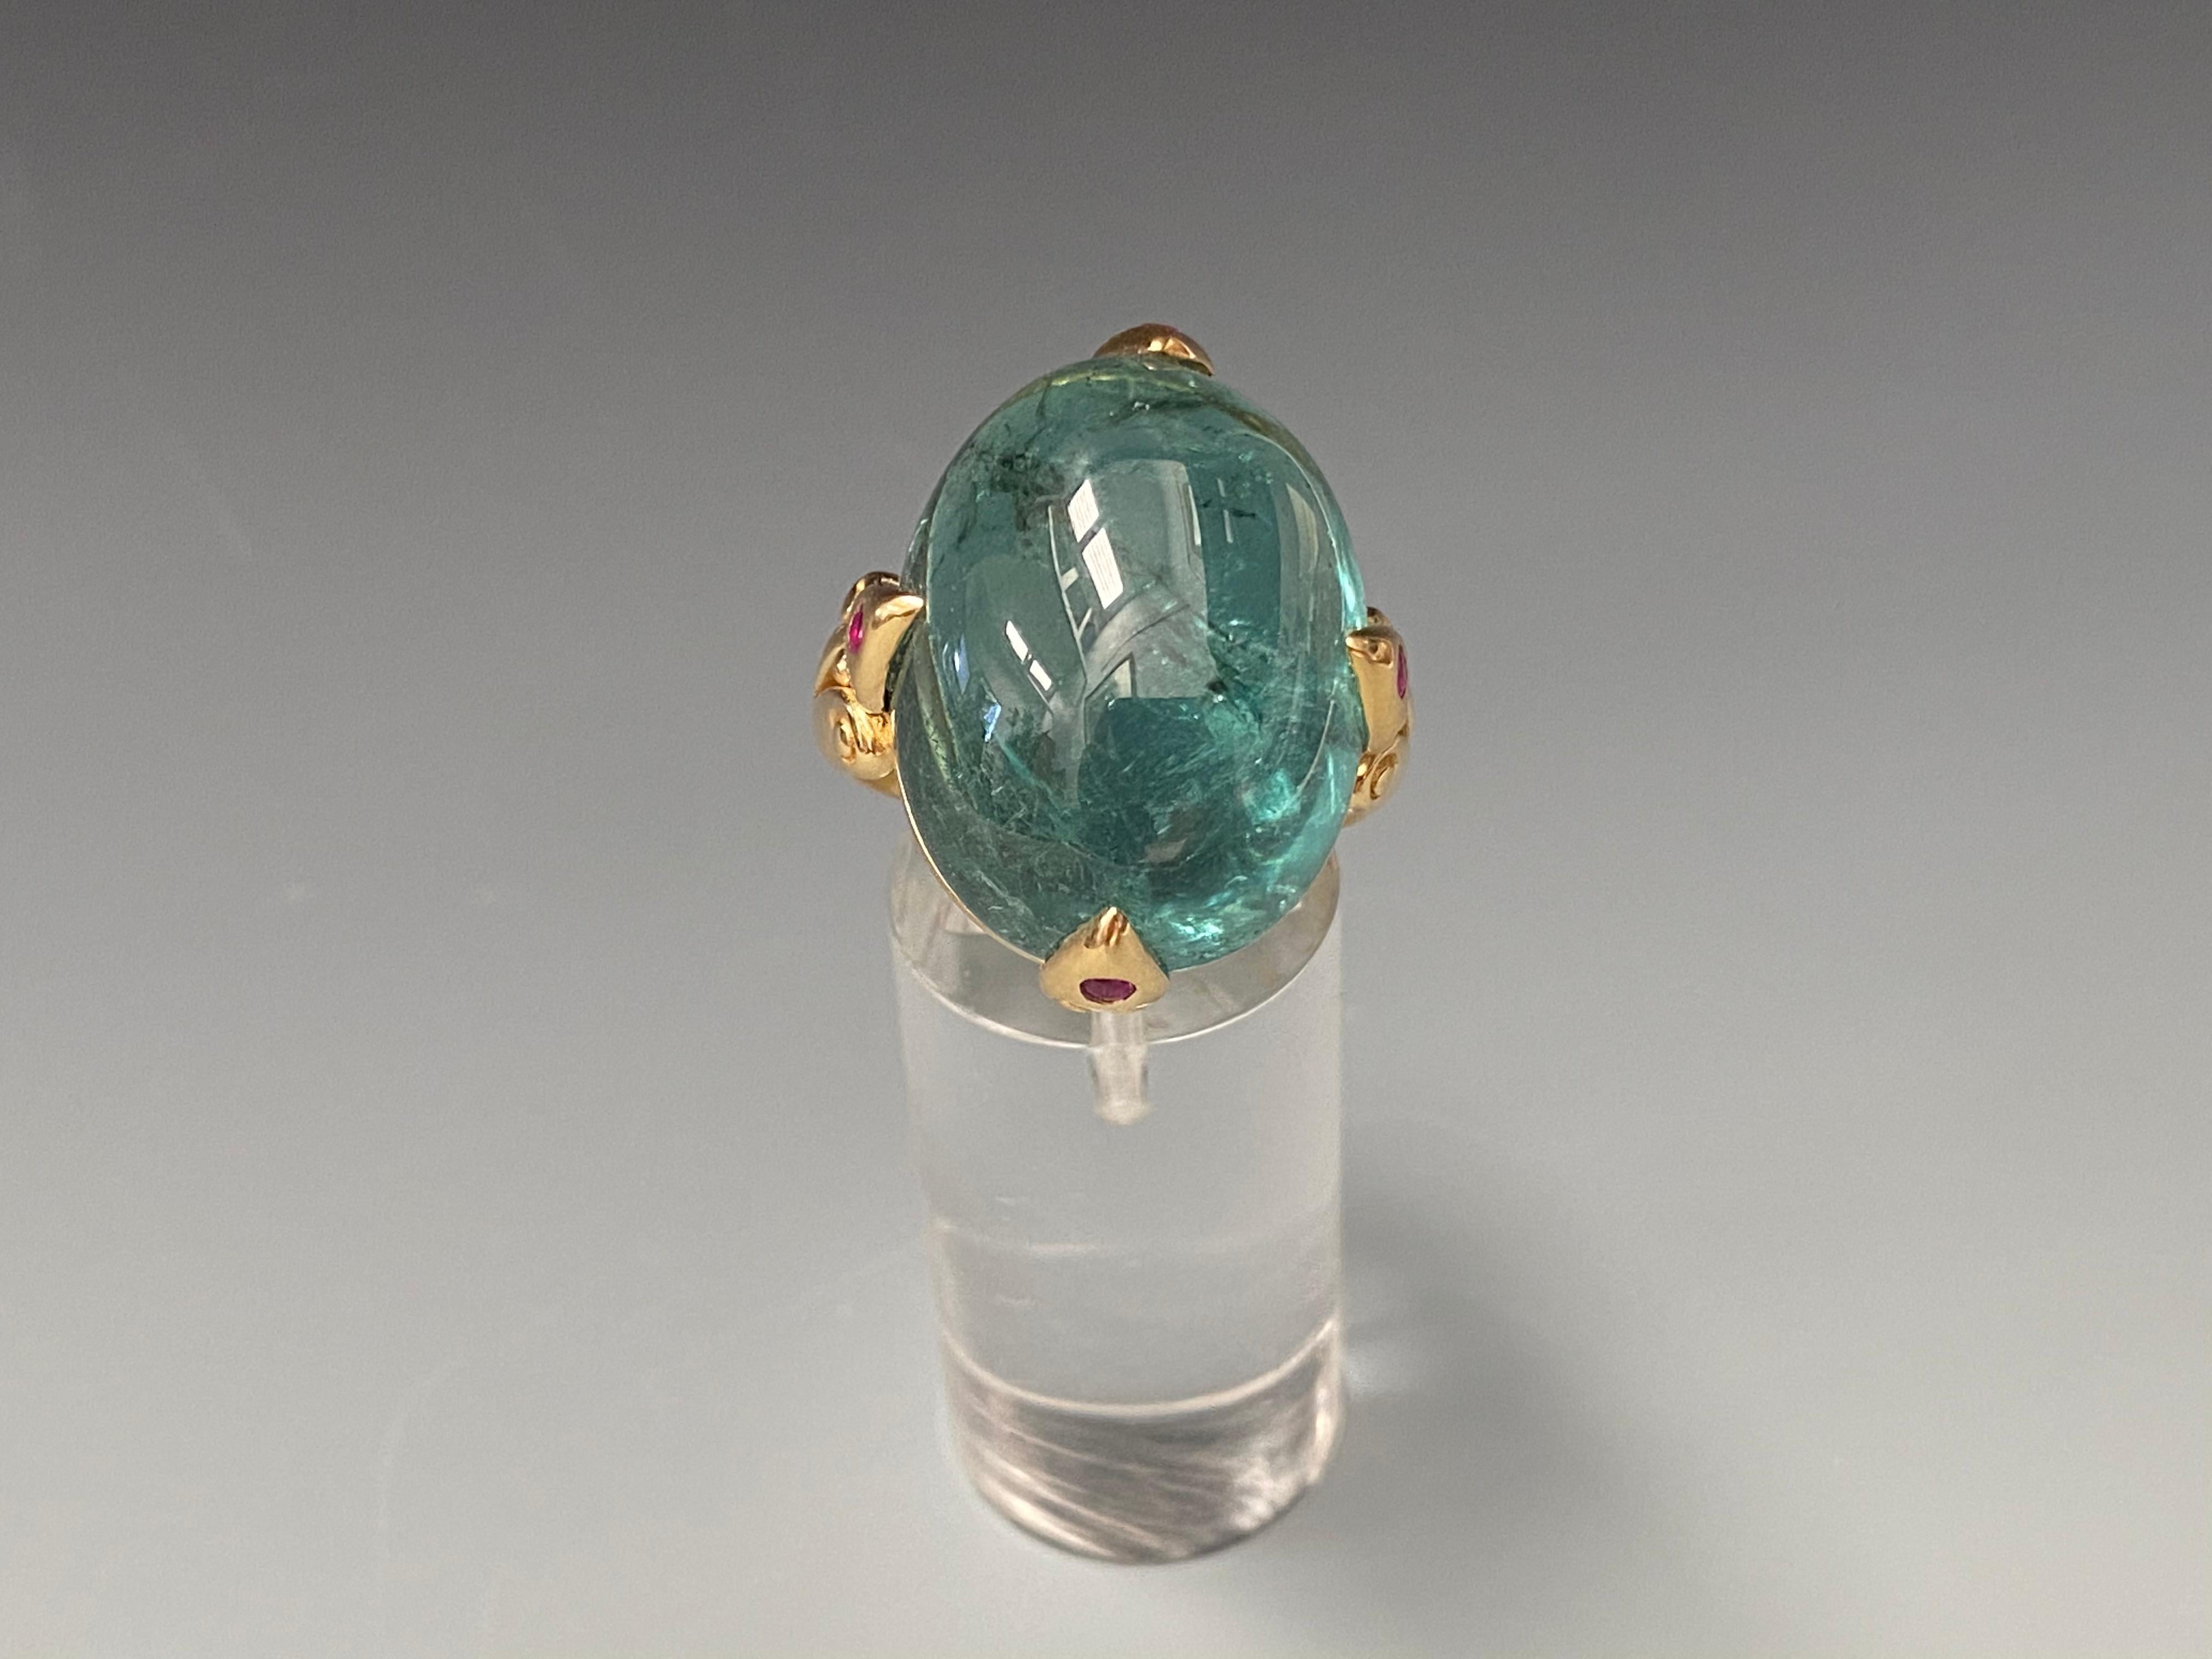 A beautiful and rare 36 carat Brazilian Indicolite Tourmaline is presented with 4 ruby accented carved prongs with a double spiral ancient inspired shank in this one of a kind Steven Battelle design. Indicolite is the indigo- or neon-blue colored